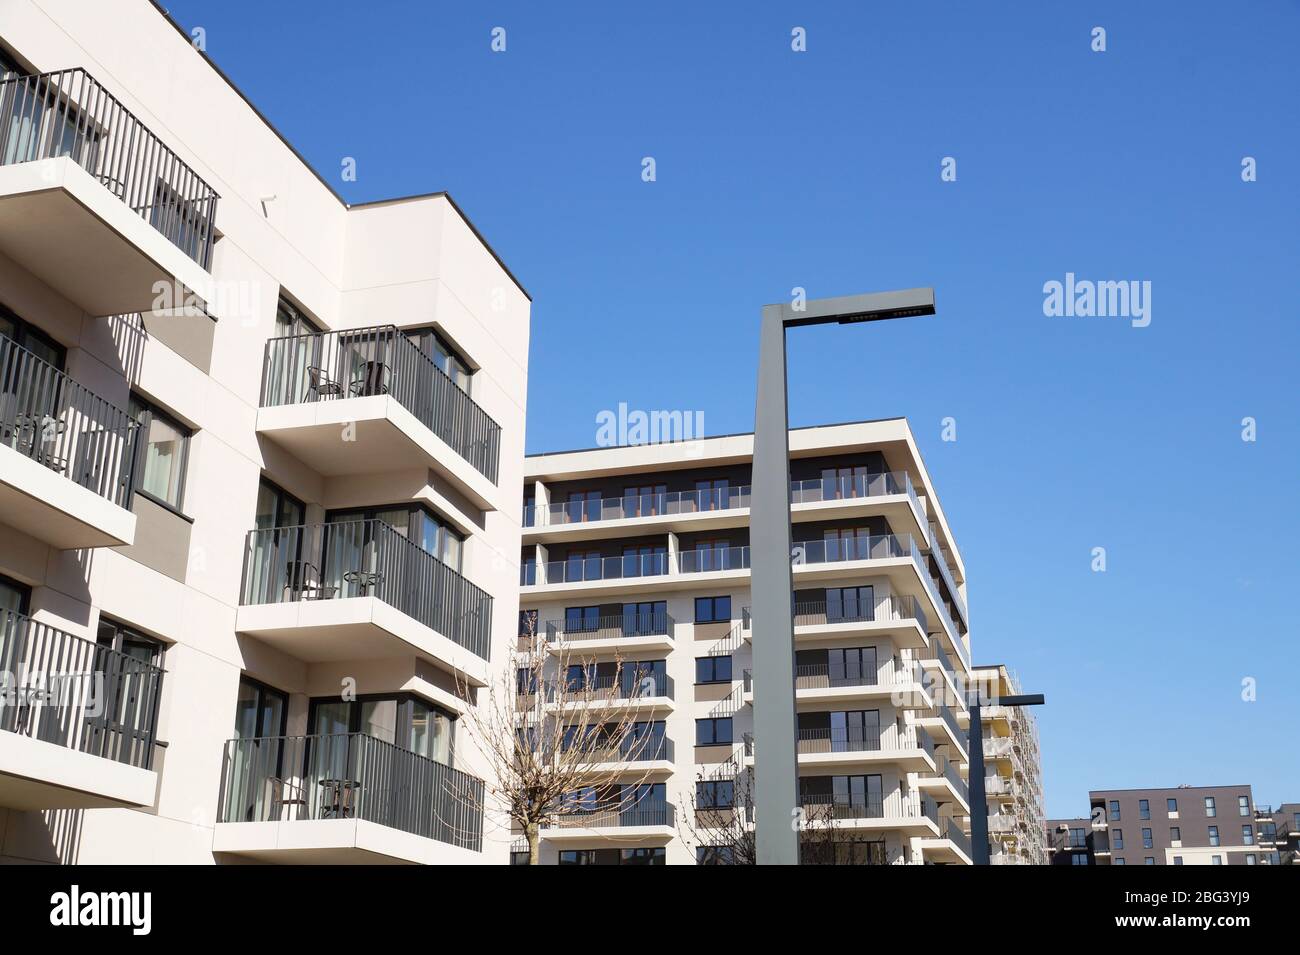 Construction of houses, final stage of construction. A newly built housing estate of multi-family houses. Stock Photo